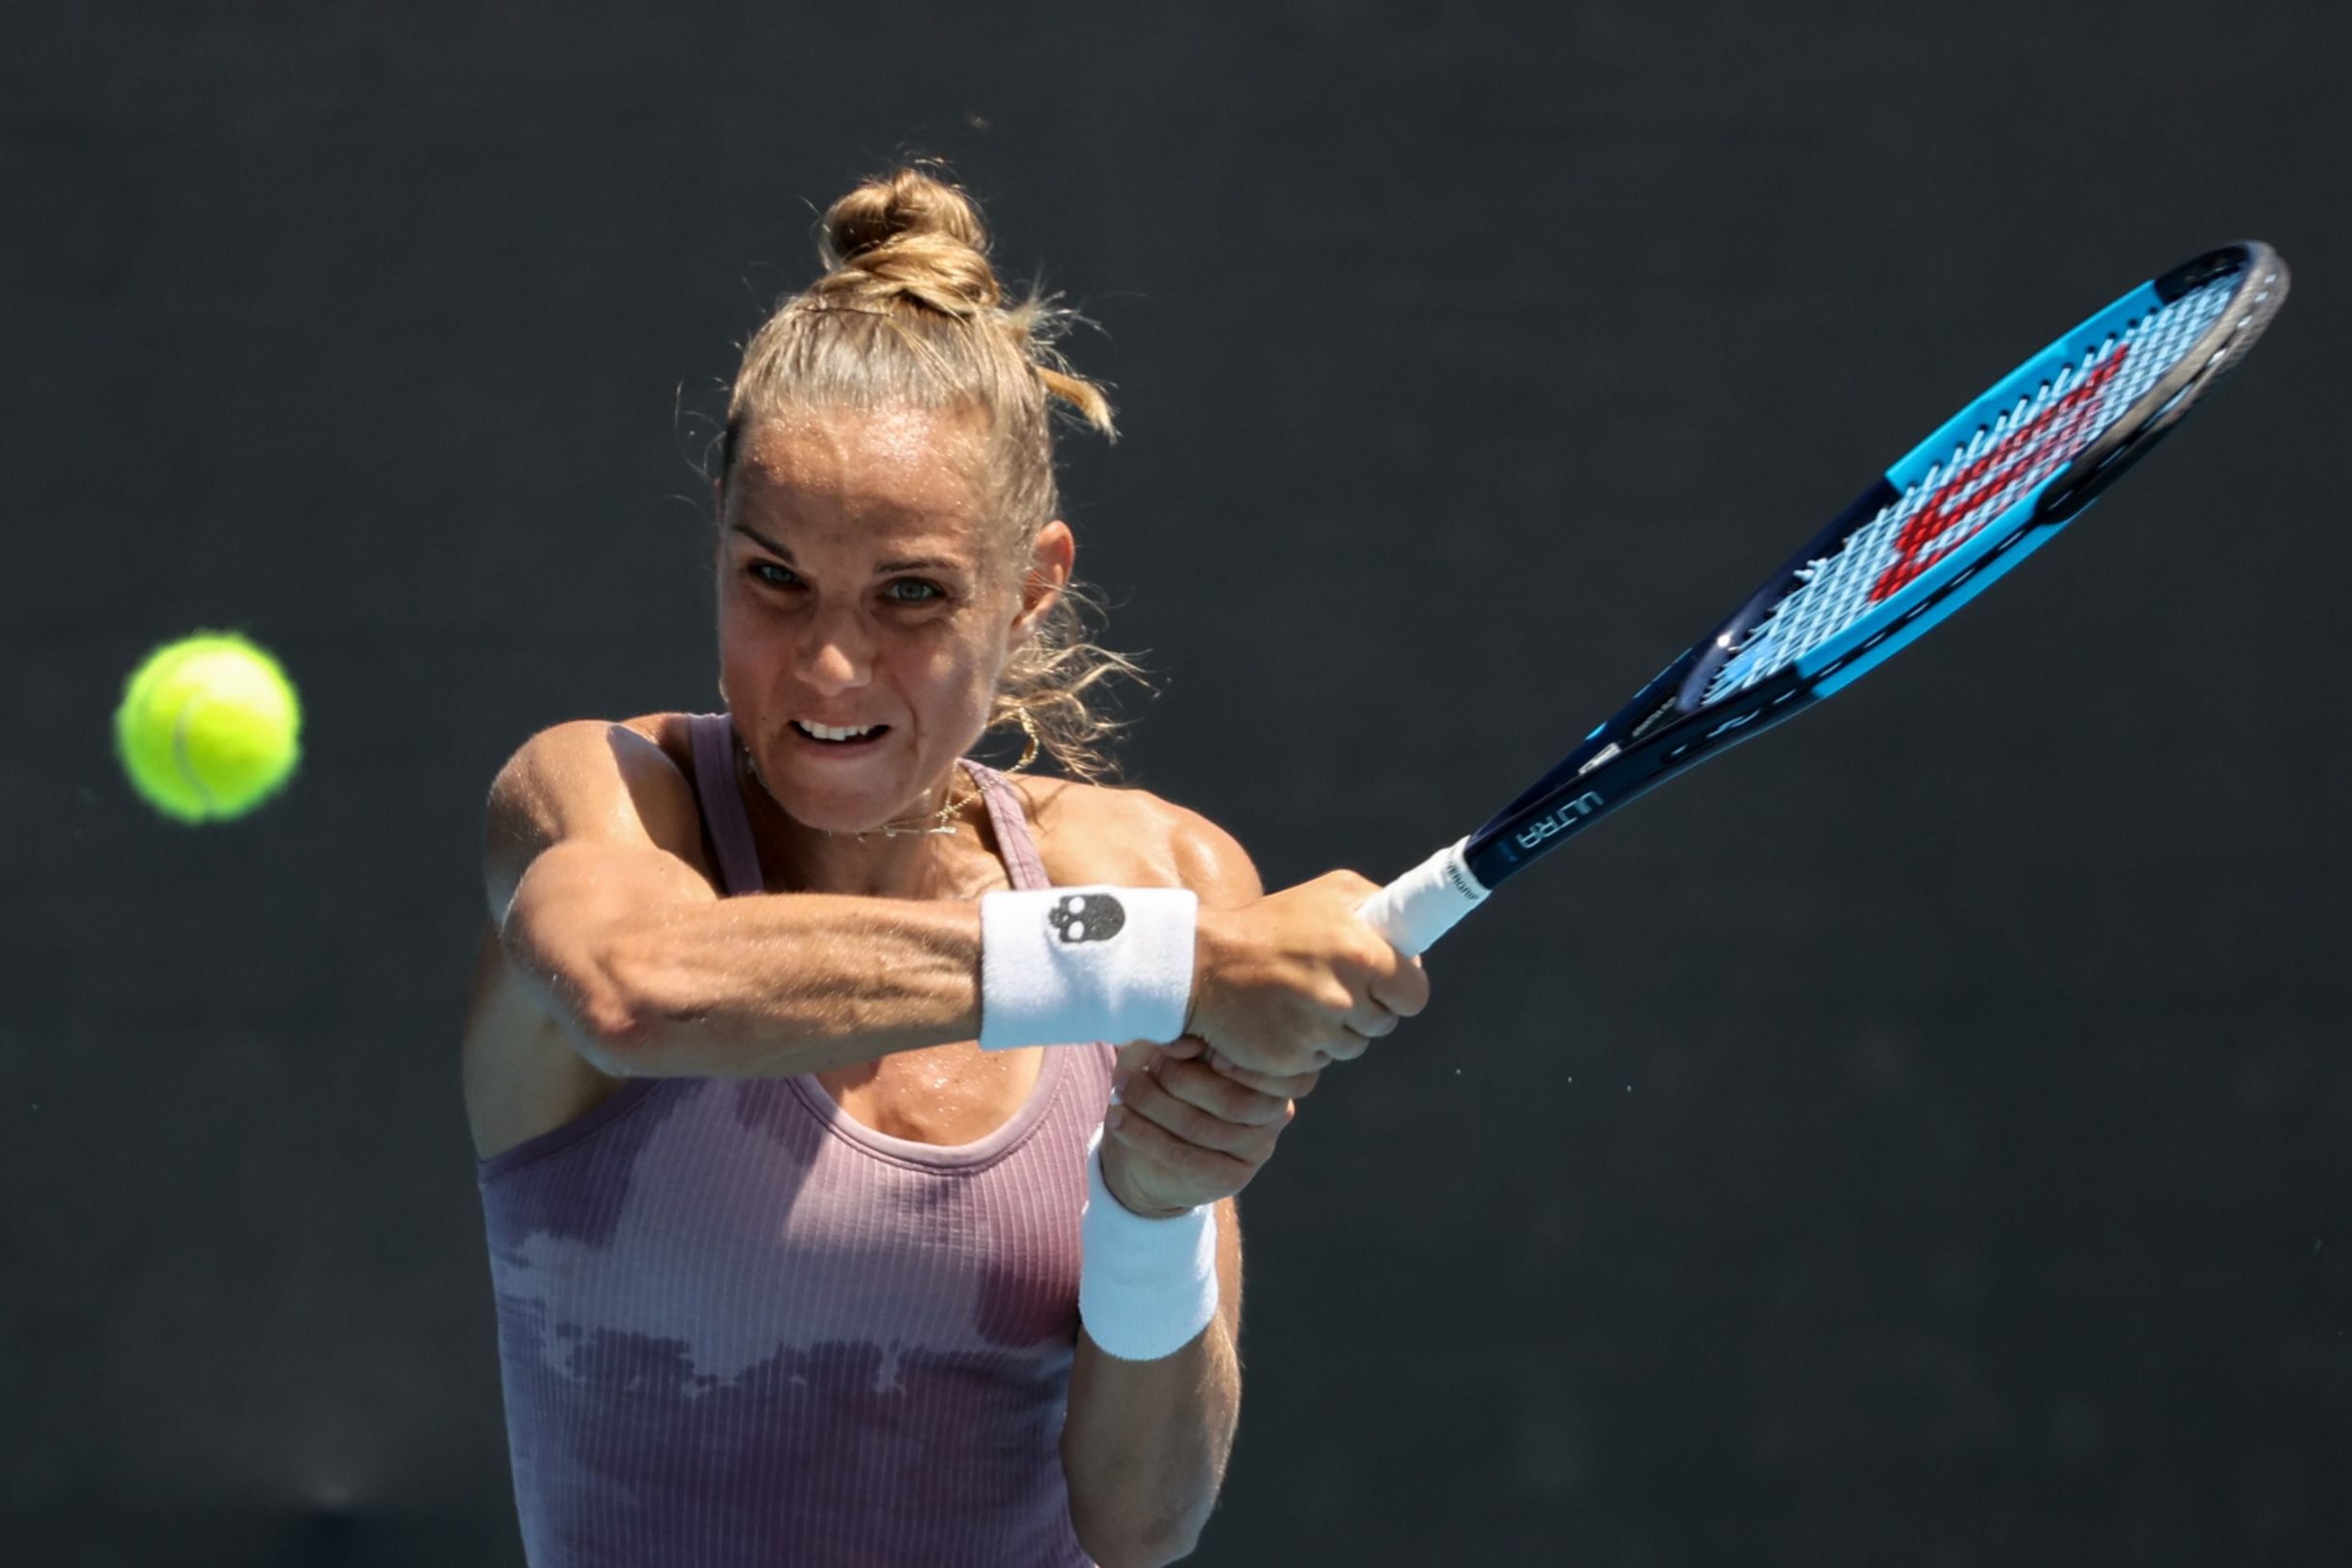 Netherlands' Arantxa Rus hits a return against Poland's Magda Linette during their women's singles match on day two of the Australian Open tennis tournament in Melbourne on January 21, 2020. (Photo by DAVID GRAY / AFP) / IMAGE RESTRICTED TO EDITORIAL USE - STRICTLY NO COMMERCIAL USE